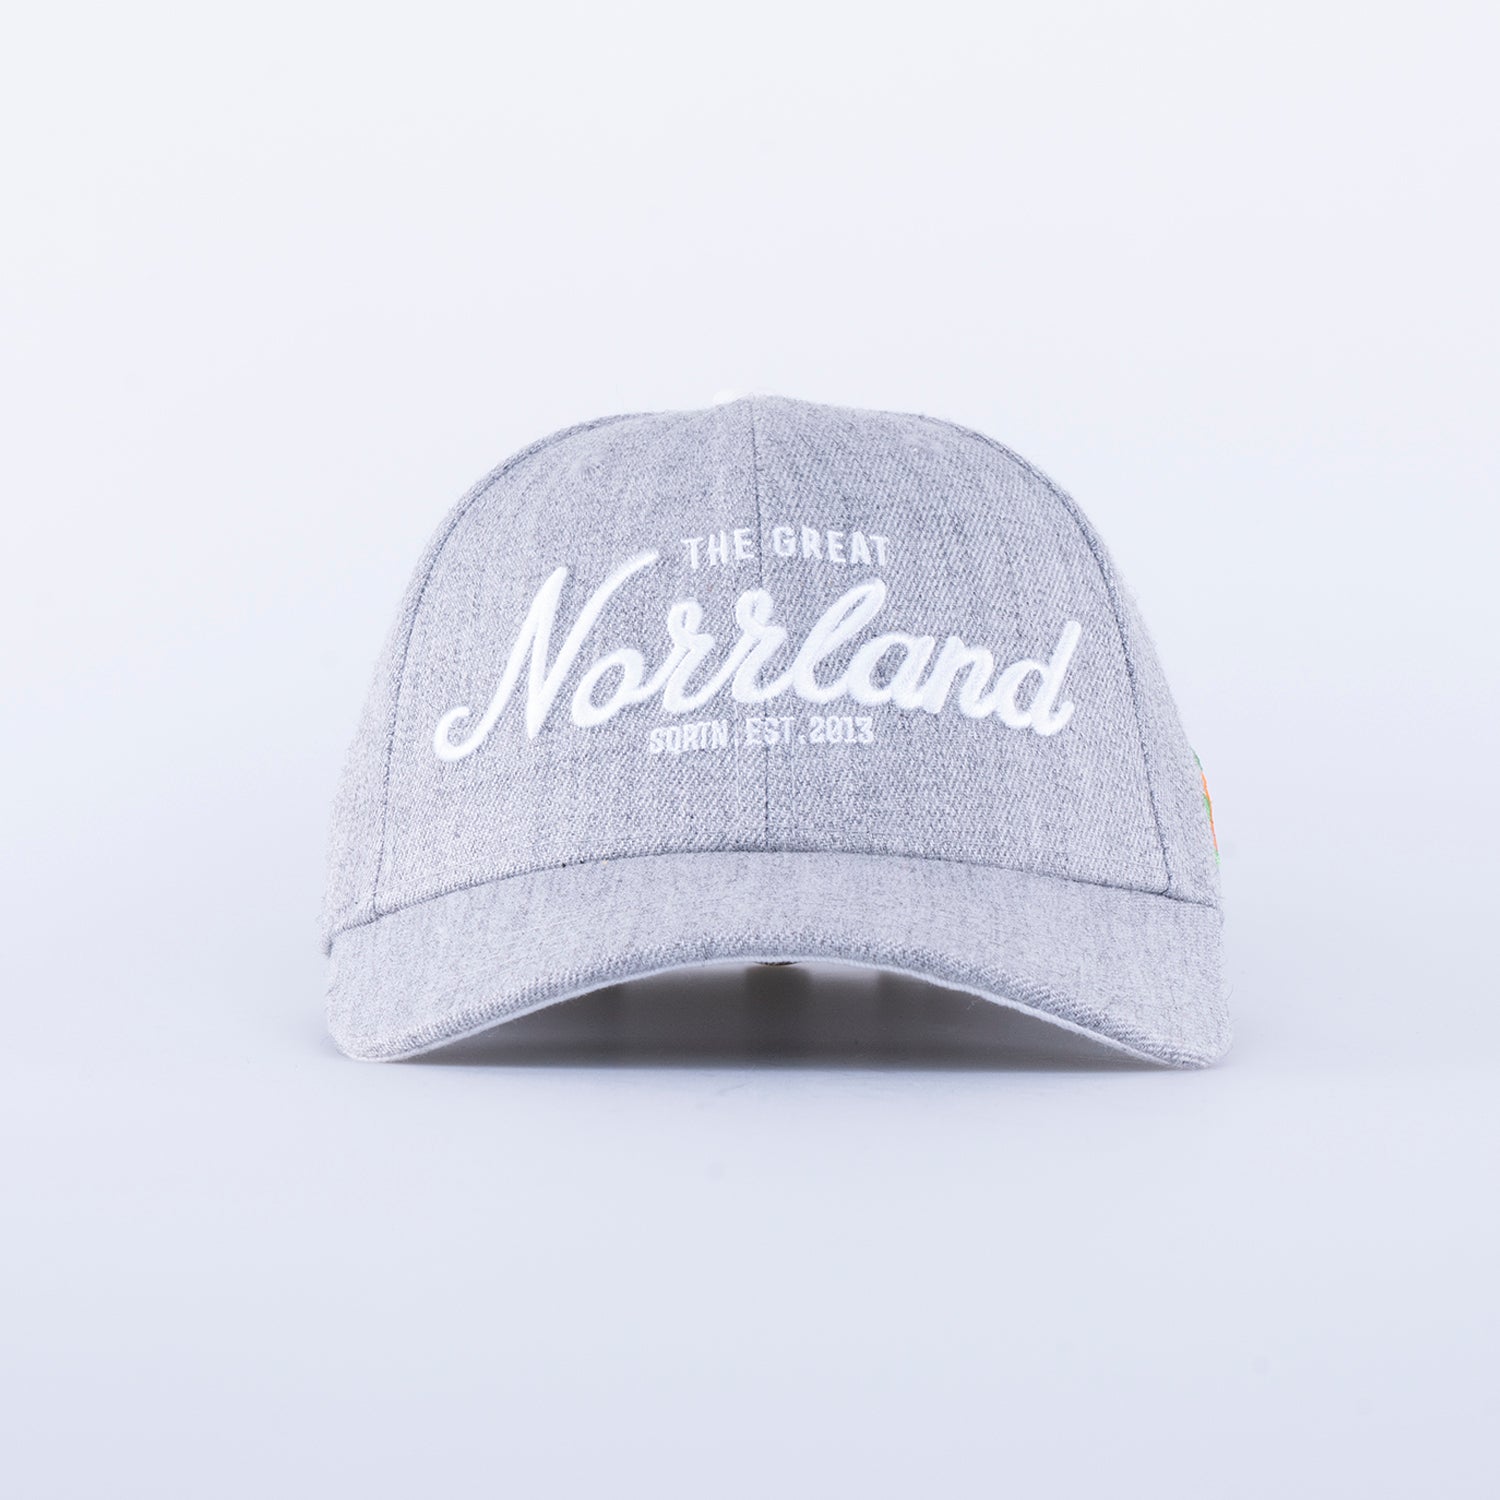 GREAT NORRLAND KEPS - HOOKED GREY